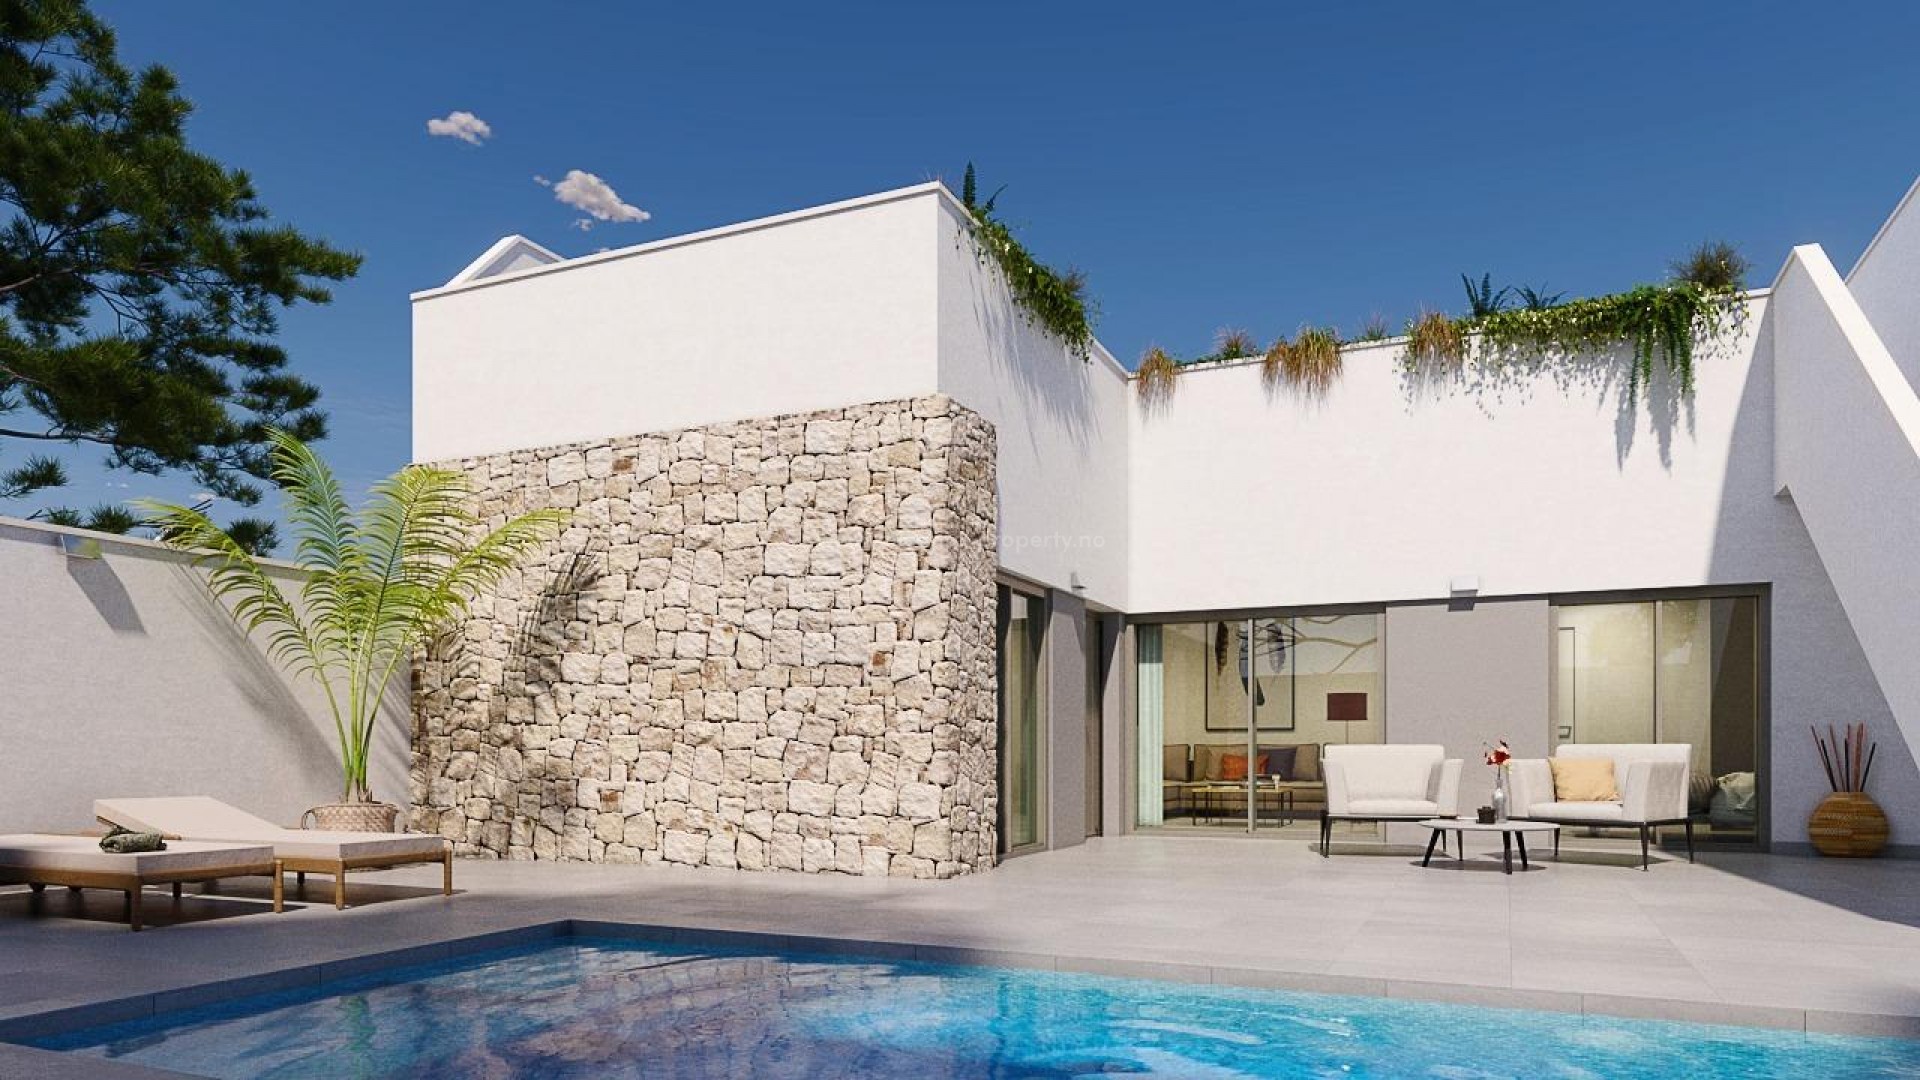 Newly built townhouse located in Pilar de la Horadada, 2 bedrooms and 2 bathrooms, possibility of private pool, garden with parking